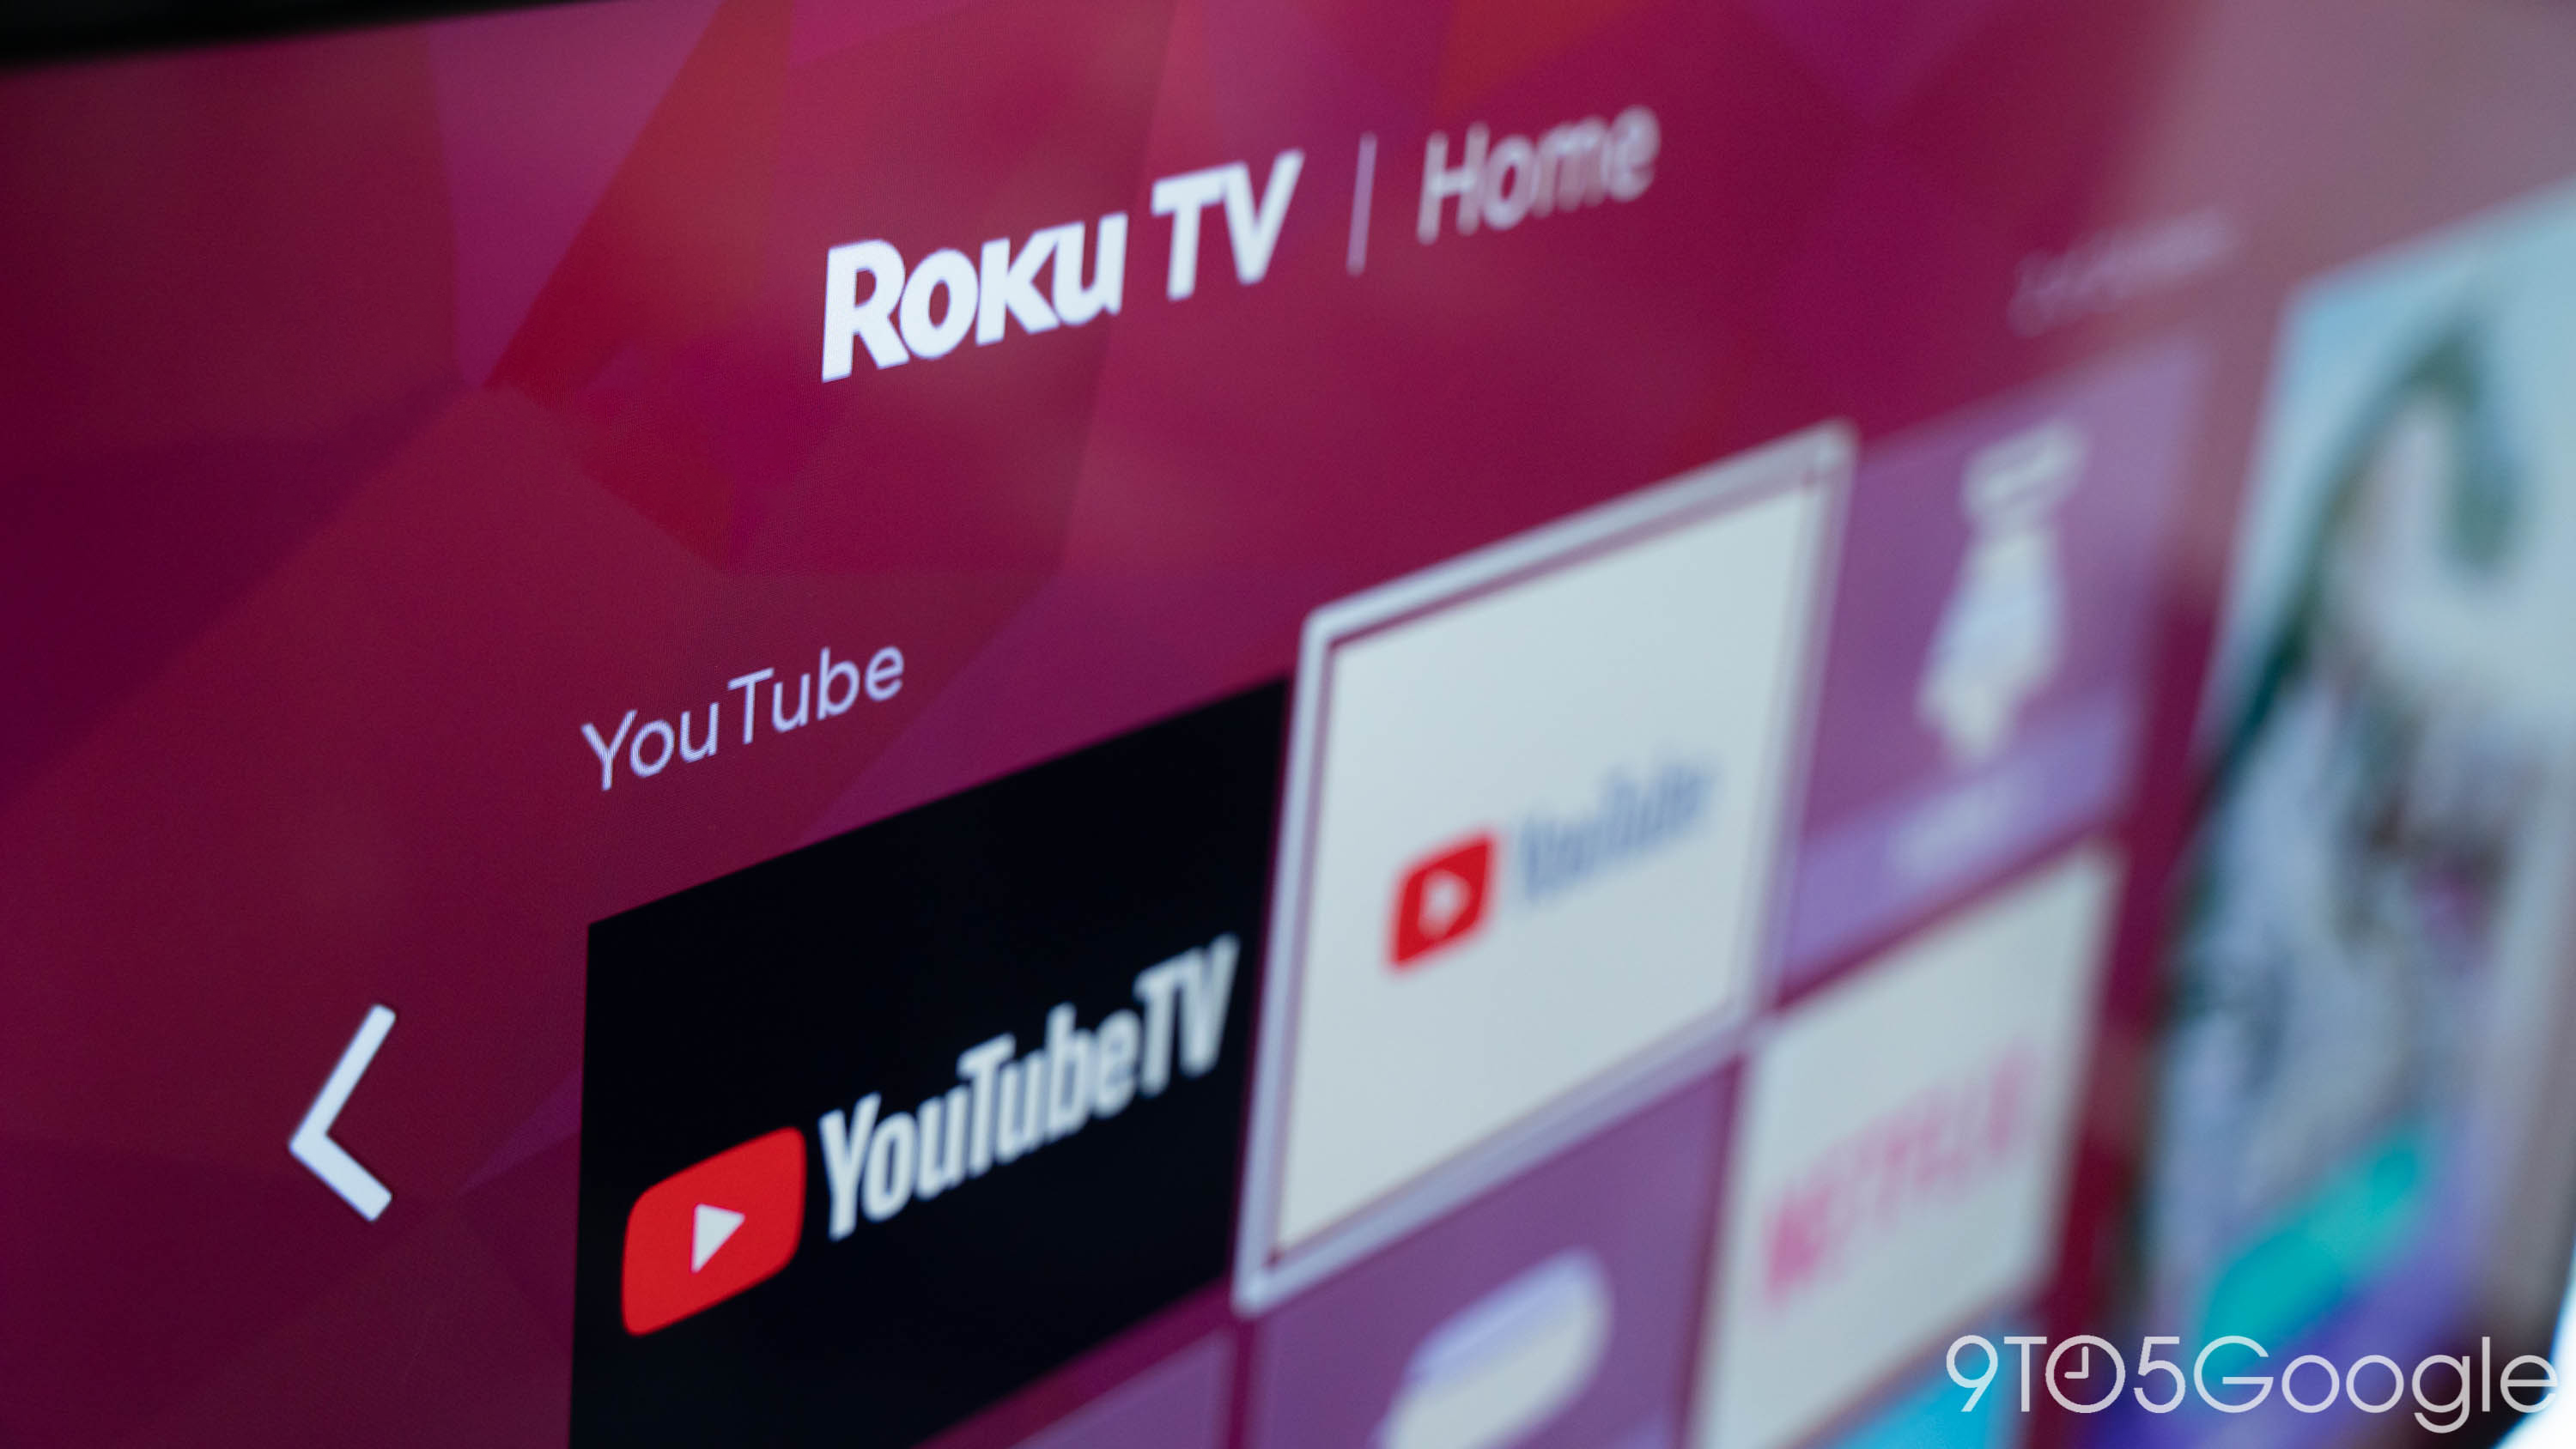 YouTube app will be removed from Roku in December